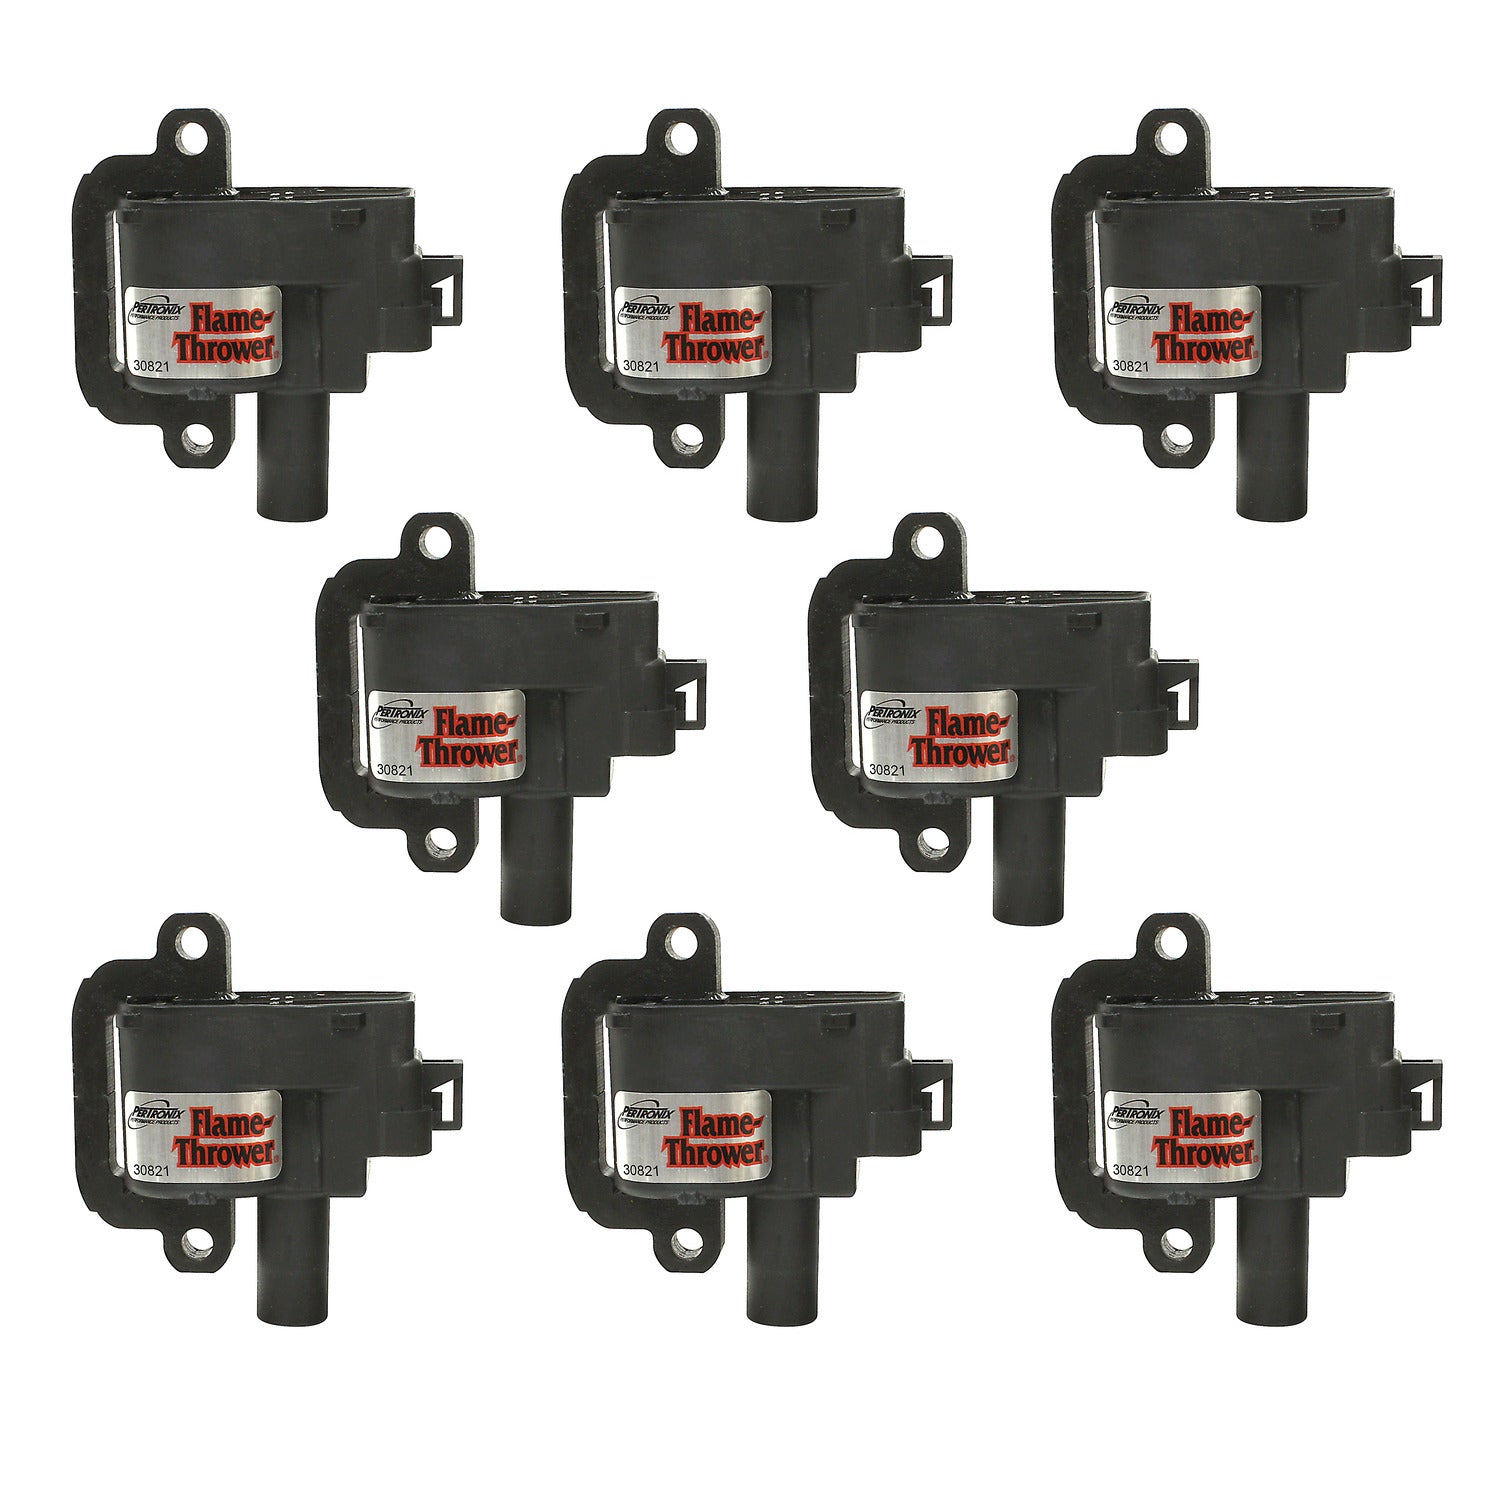 Pertronix 30828 Flame-Thrower Smart Ignition Performance Replacement Coil GM LS1/LS6 Engines set of 8